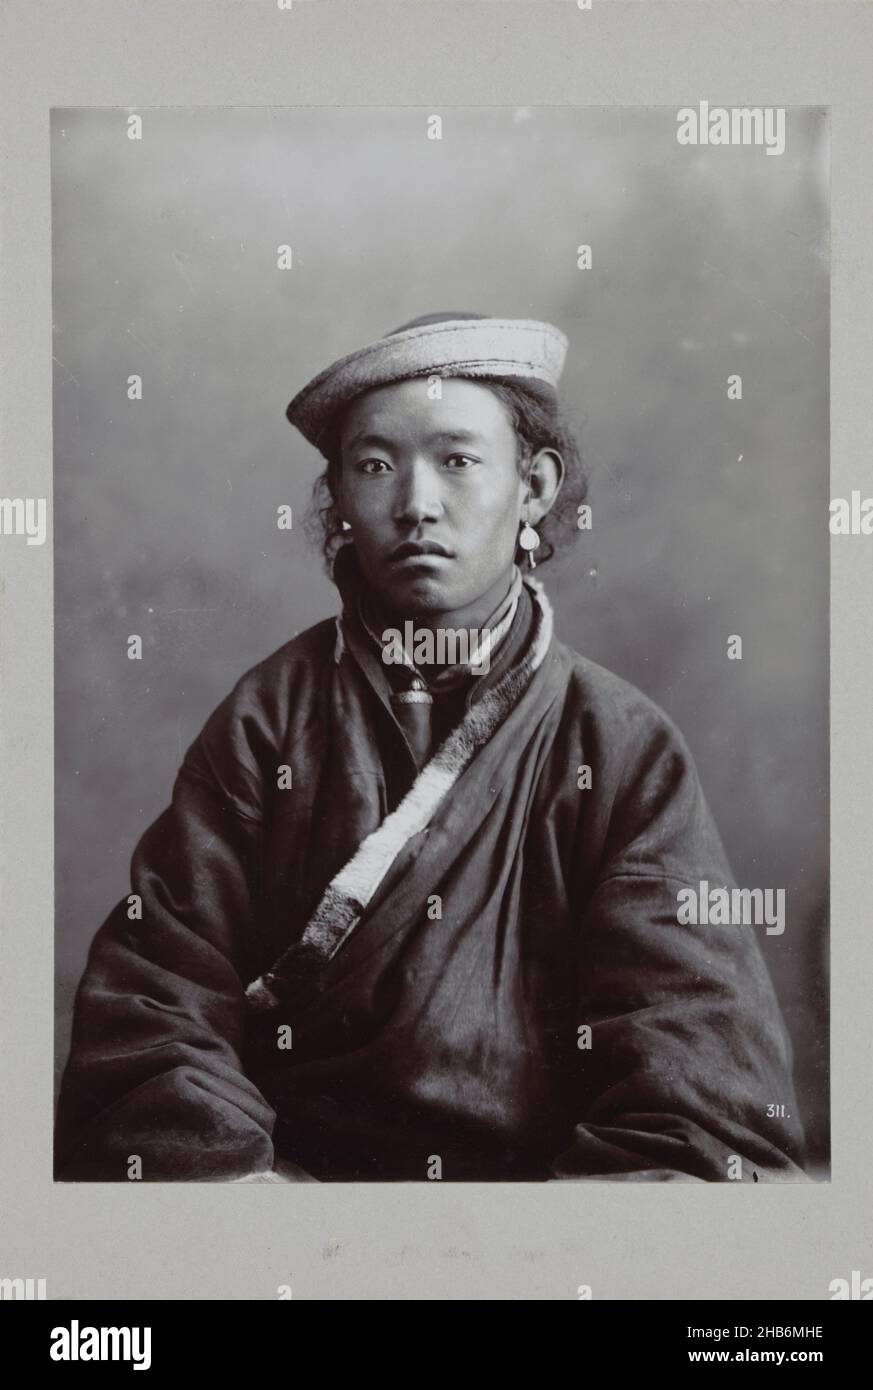 Portrait of a Tibetan man, The number 311 is on the bottom right., Theodor Paar (possibly), Darjiling, c. 1895 - c. 1915, paper, cardboard, height 201 mm × width 145 mmheight 244 mm × width 164 mm Stock Photo